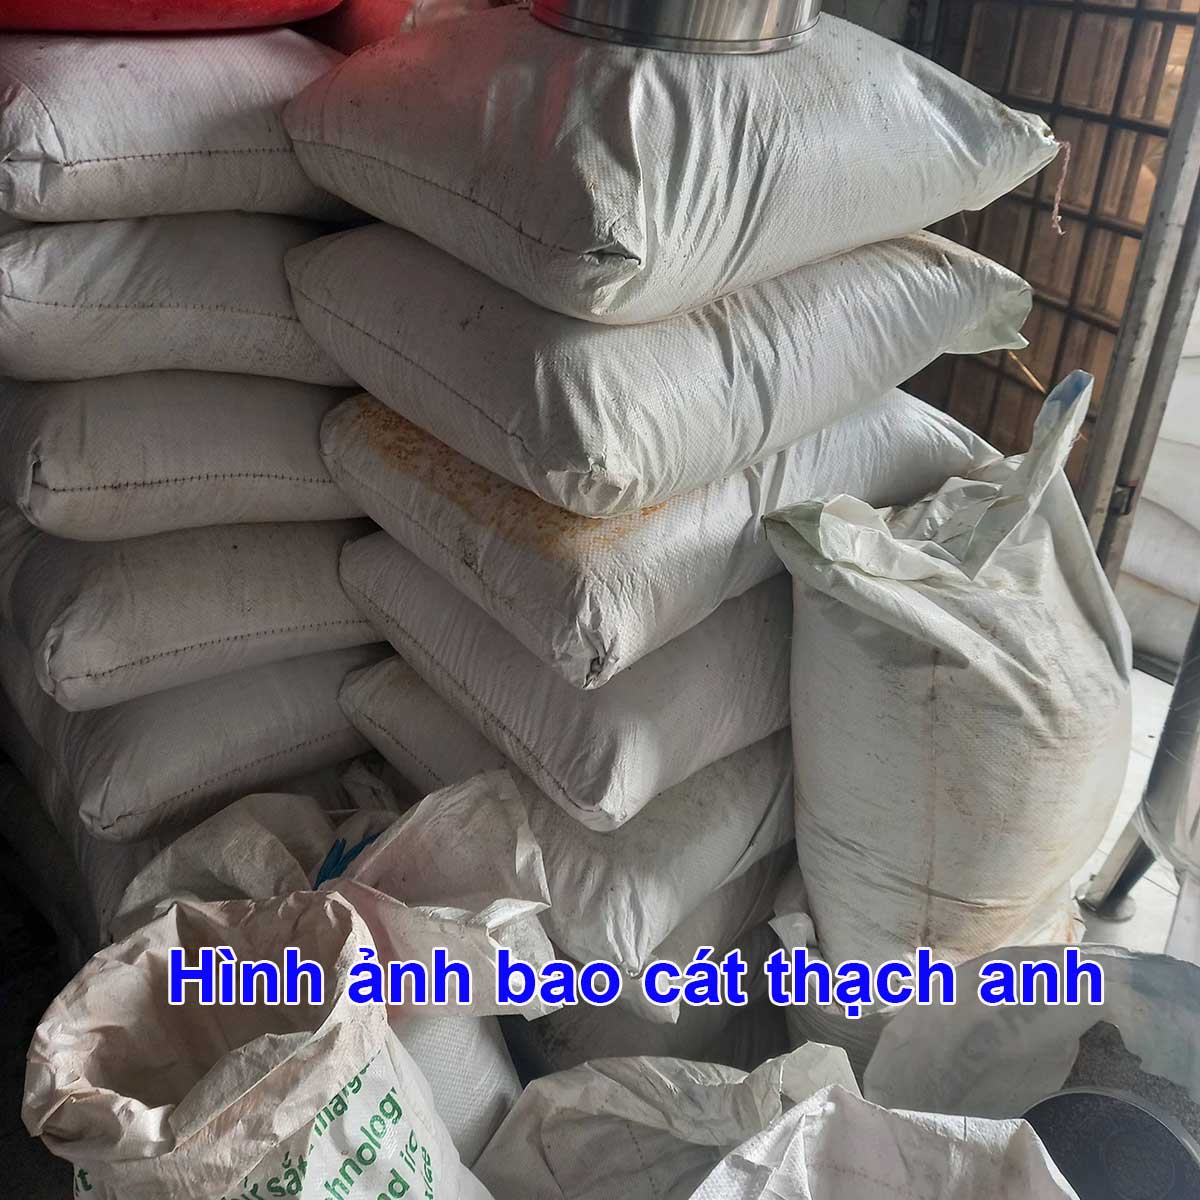 bao cat thach anh 45kg